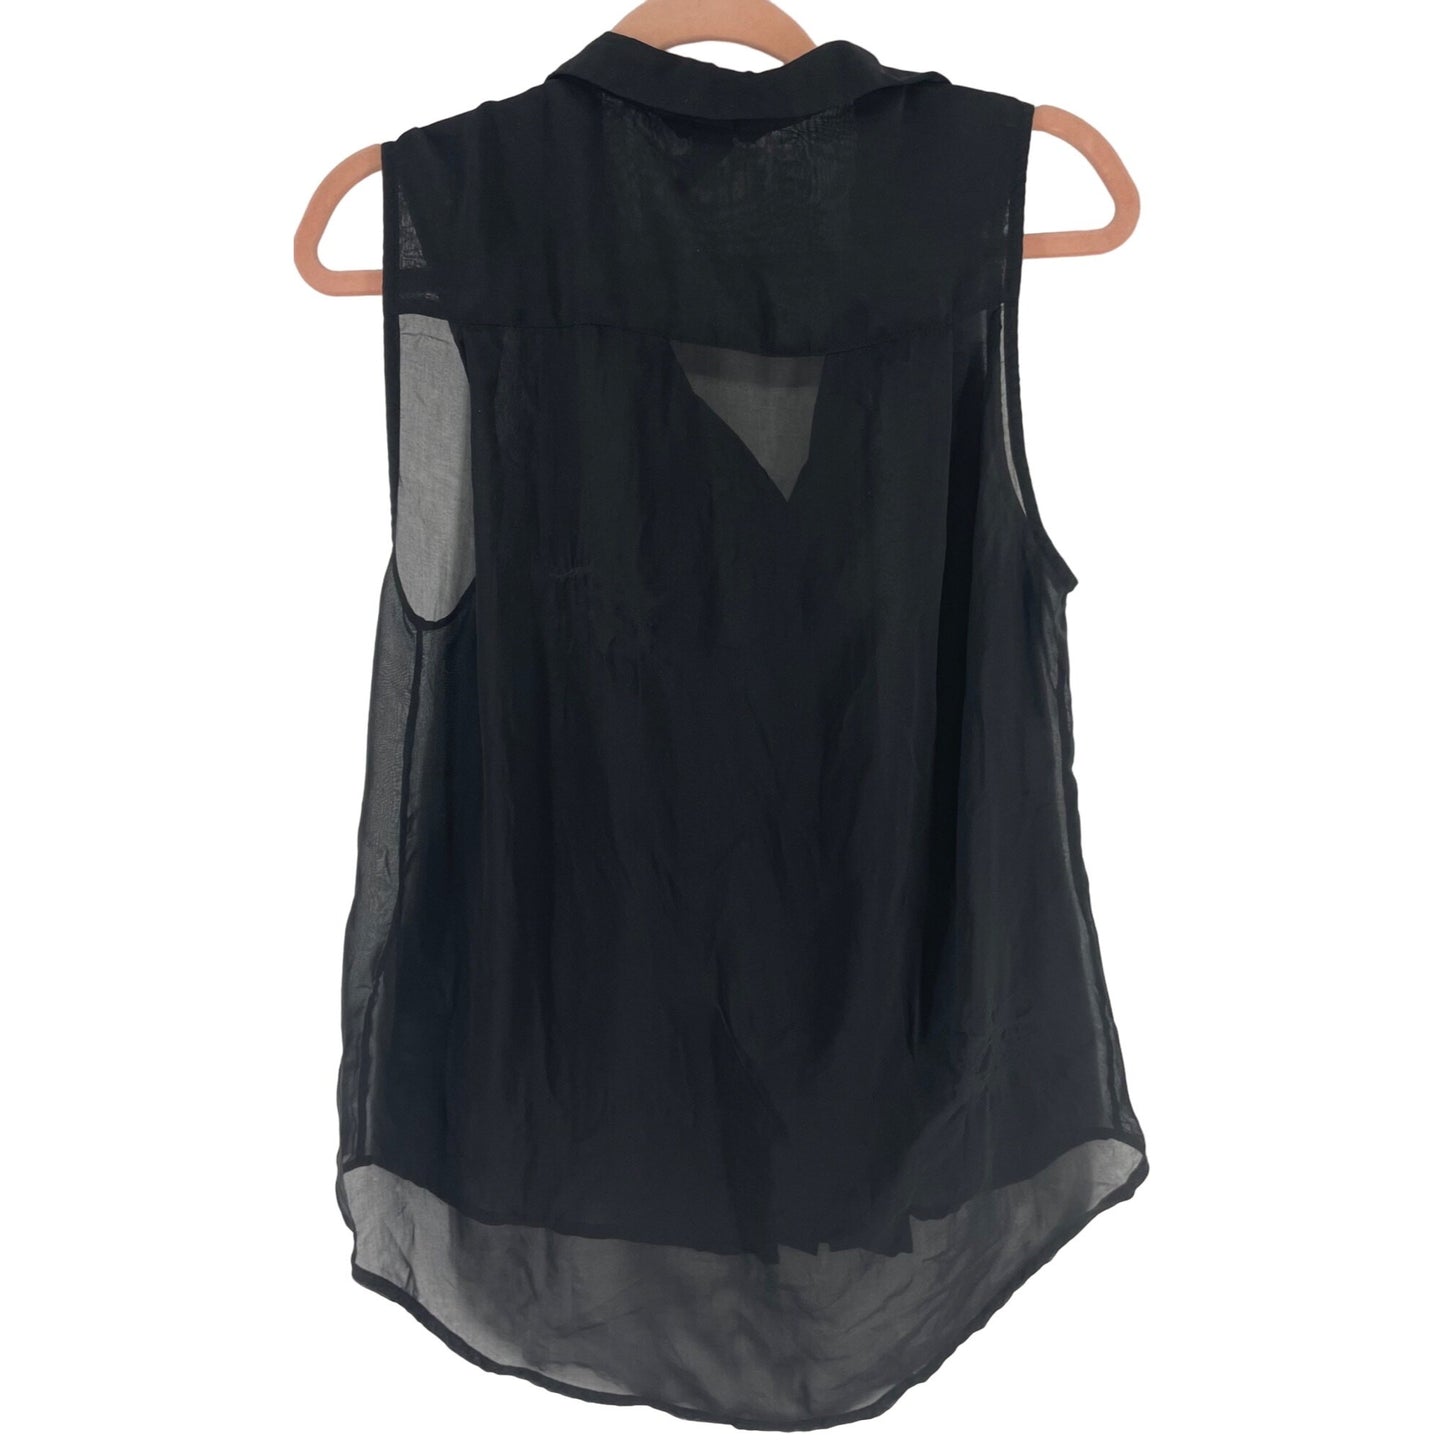 CLEARANCE H&M Women's Size 8 Black Sleeveless Sheer Button-Down Blouse